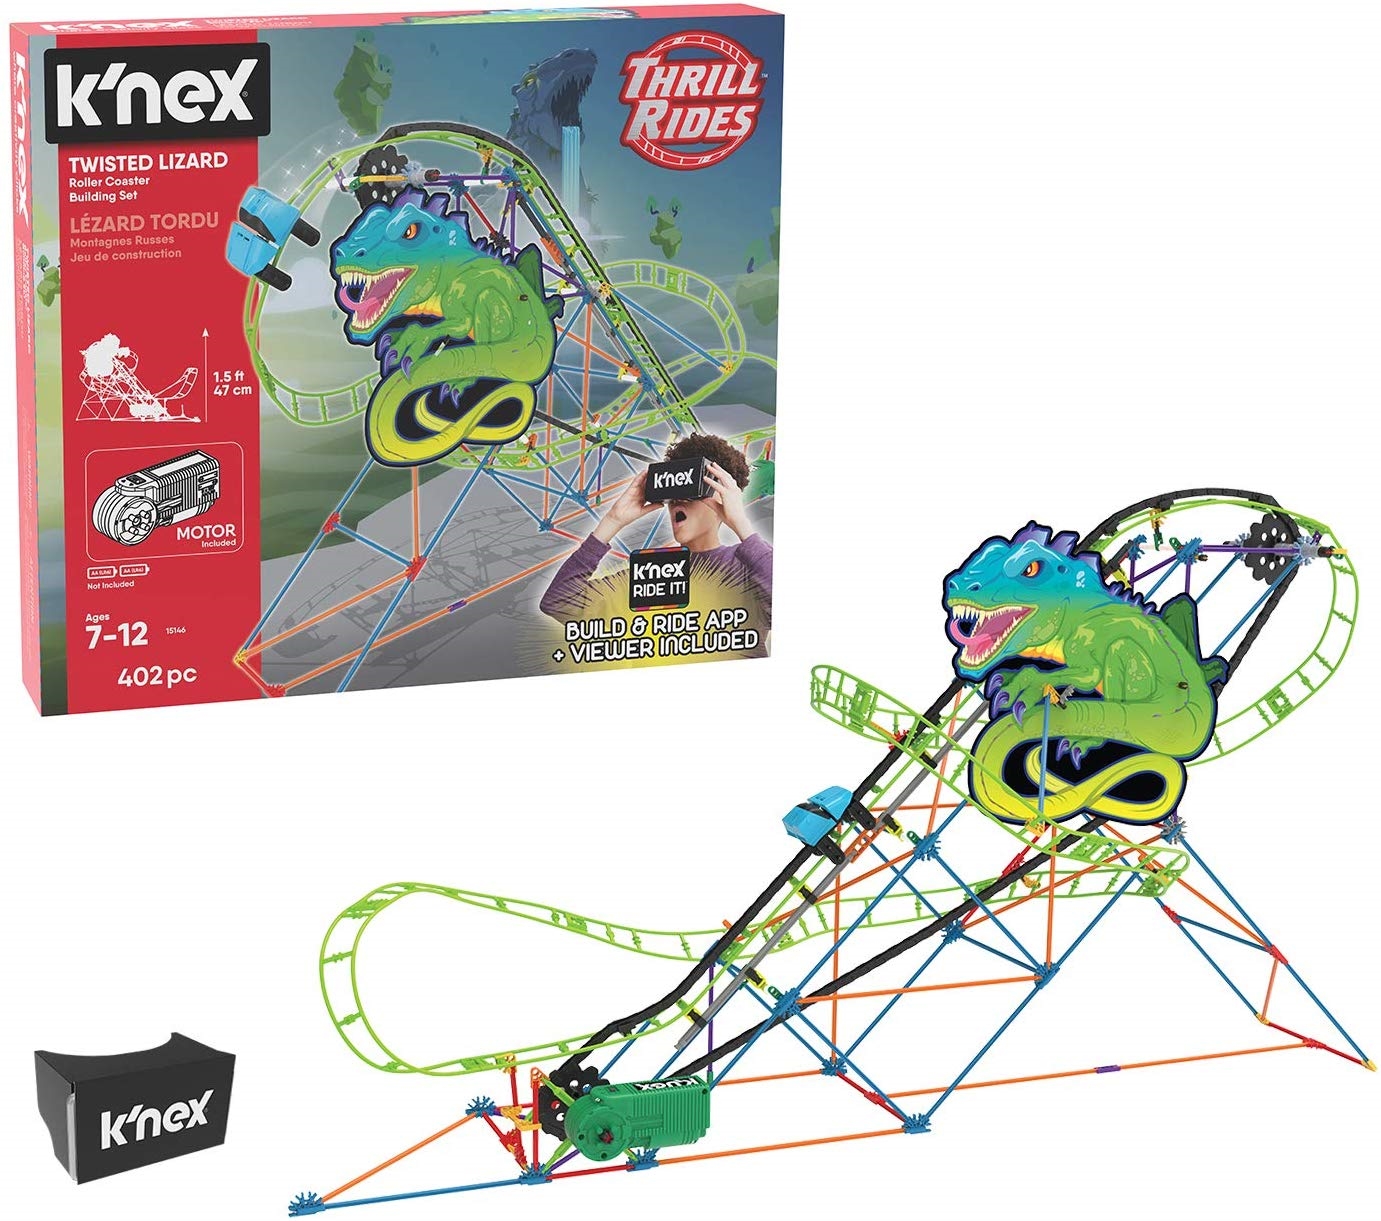 K'nex Thrill Rides Twisted Lizard Roller Coaster Building Set with Ride It App, Ages Classic Thrill Rides (New Open Box) - image 1 of 3